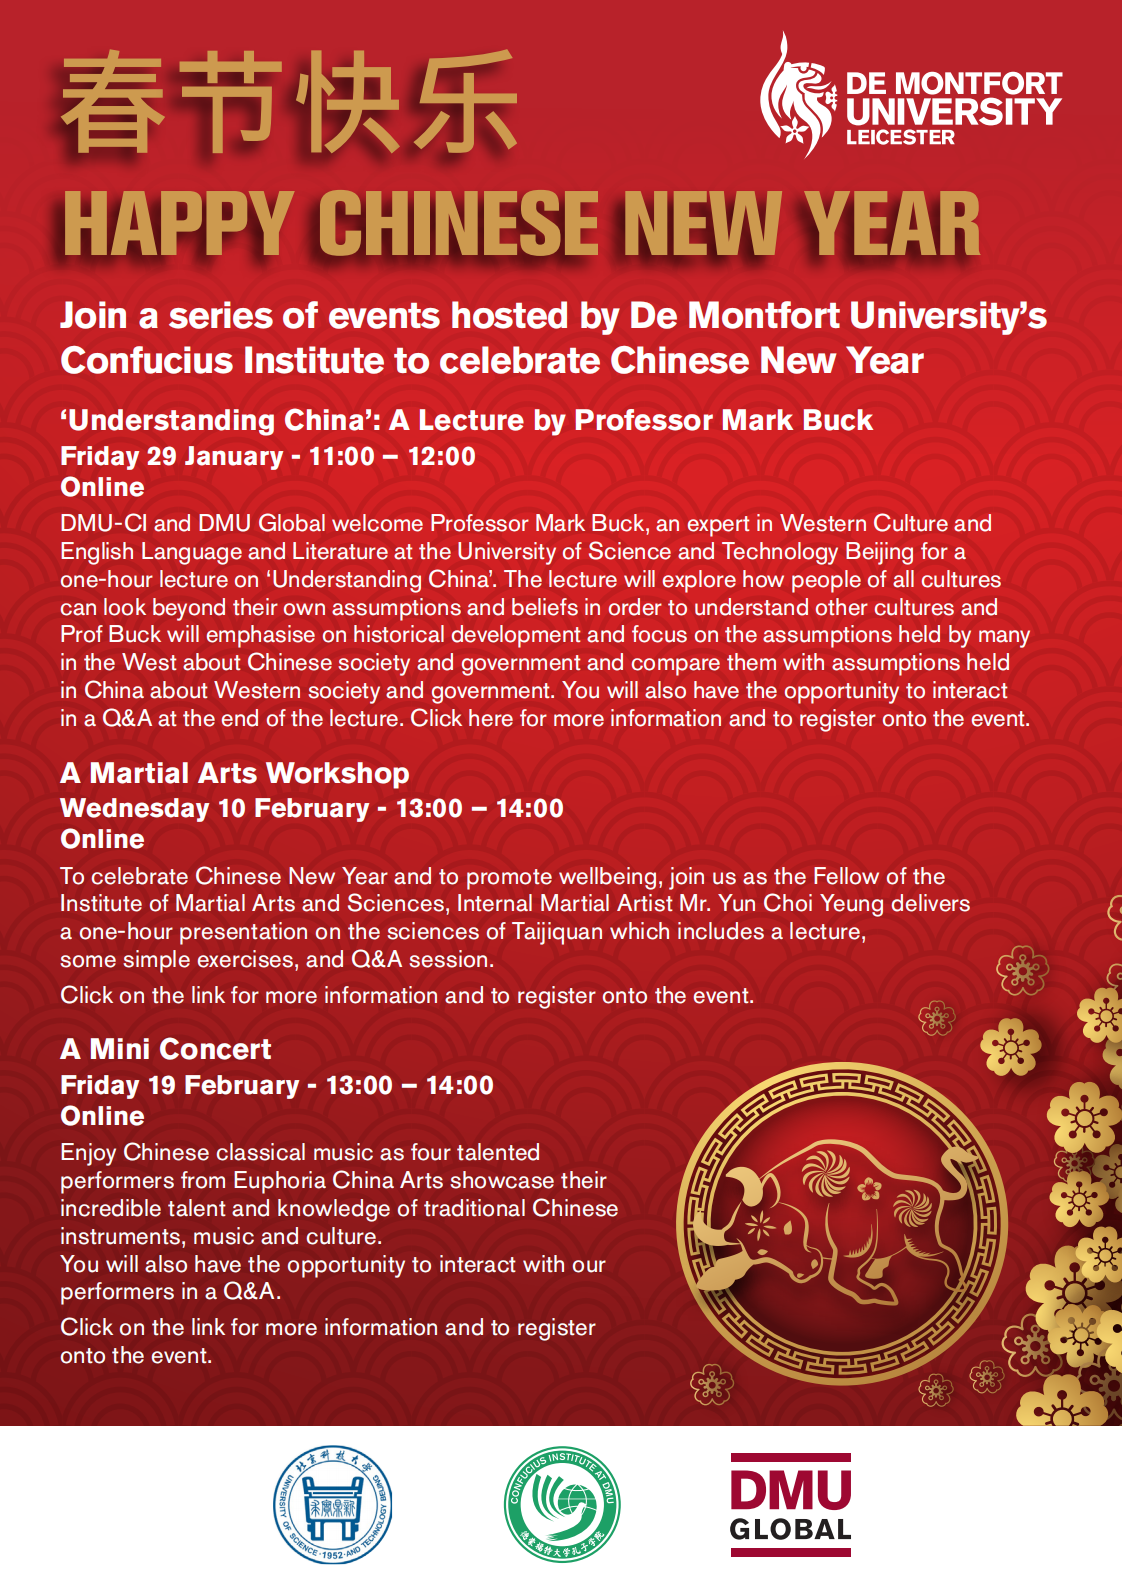 DMU012021_896-Chinese New Year Leaflet_00.png